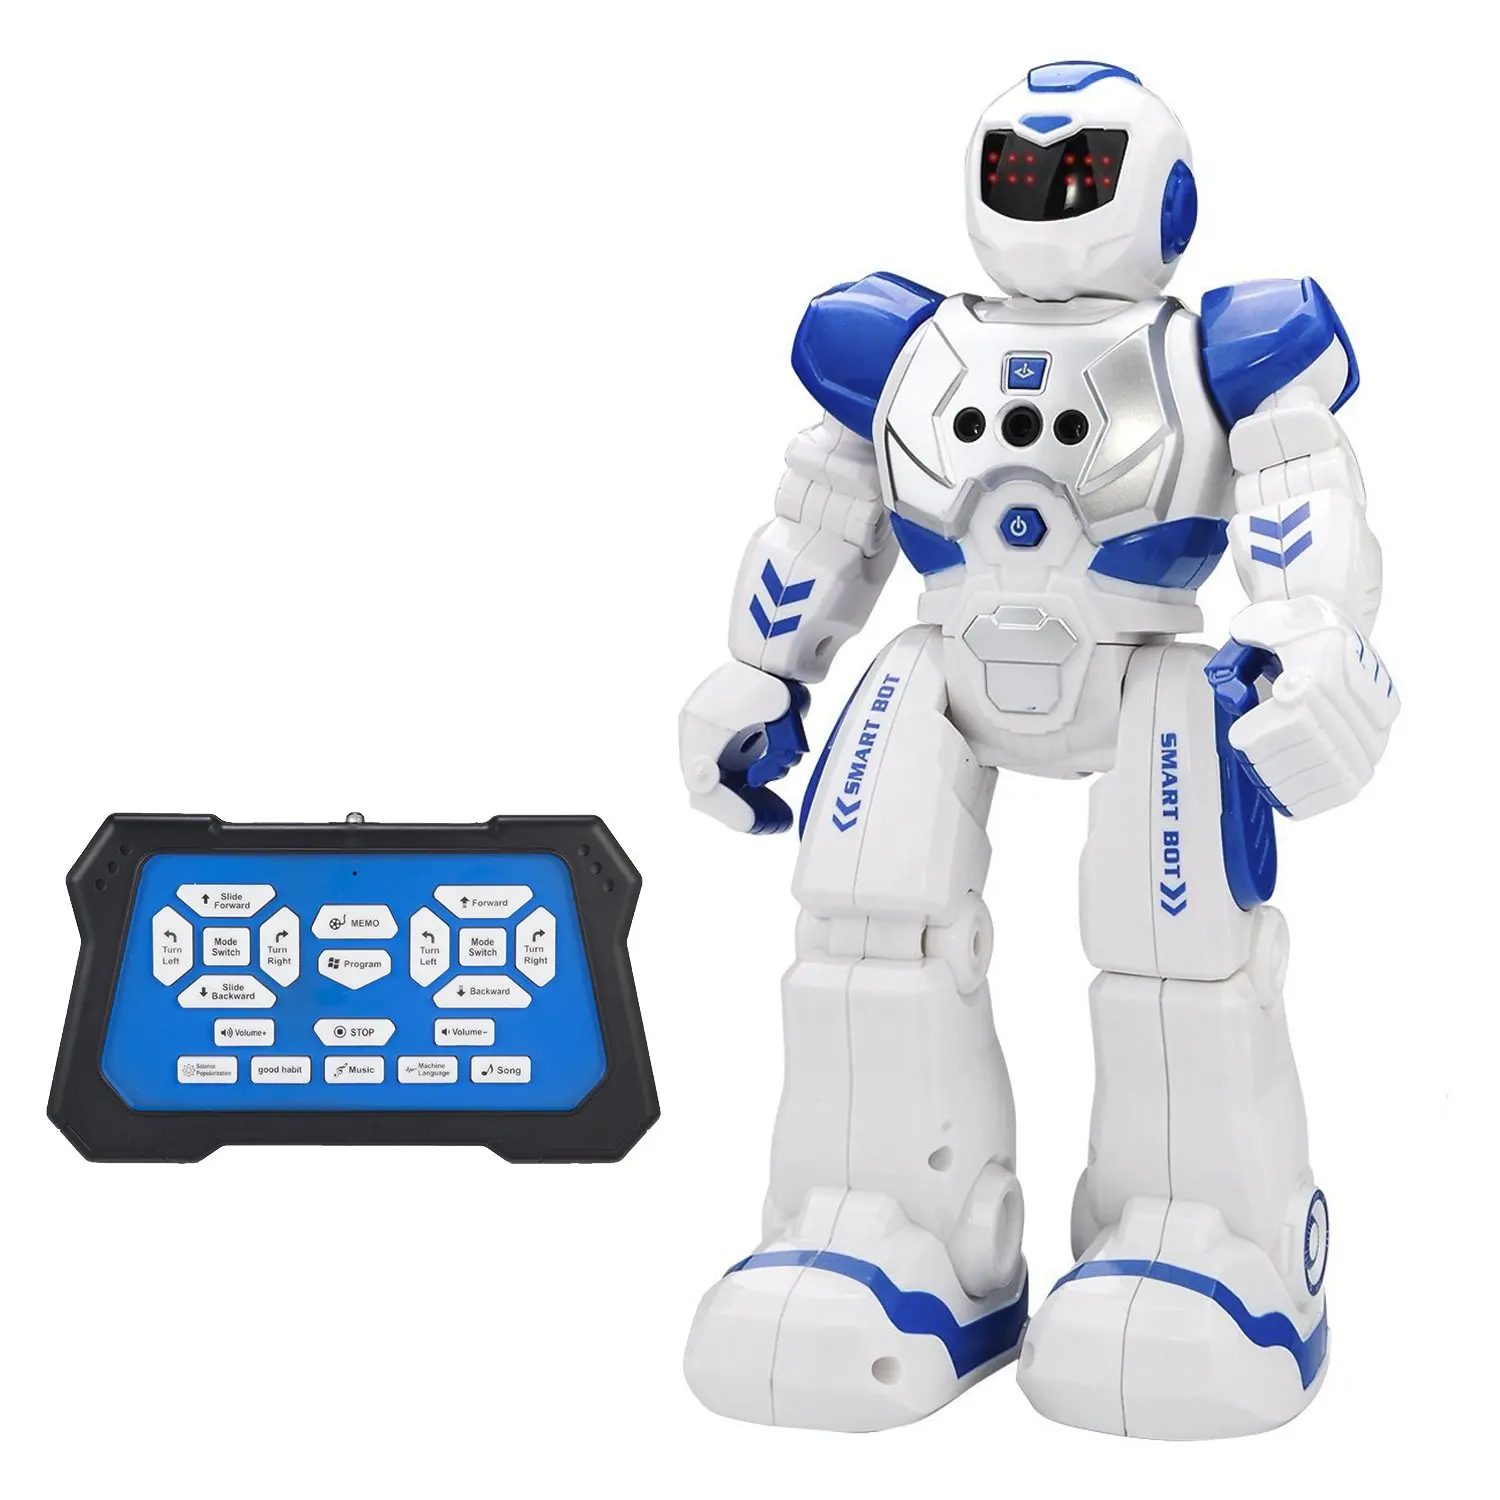 Buy KidzLabs Robot Toys Science Experiments for Kids ...